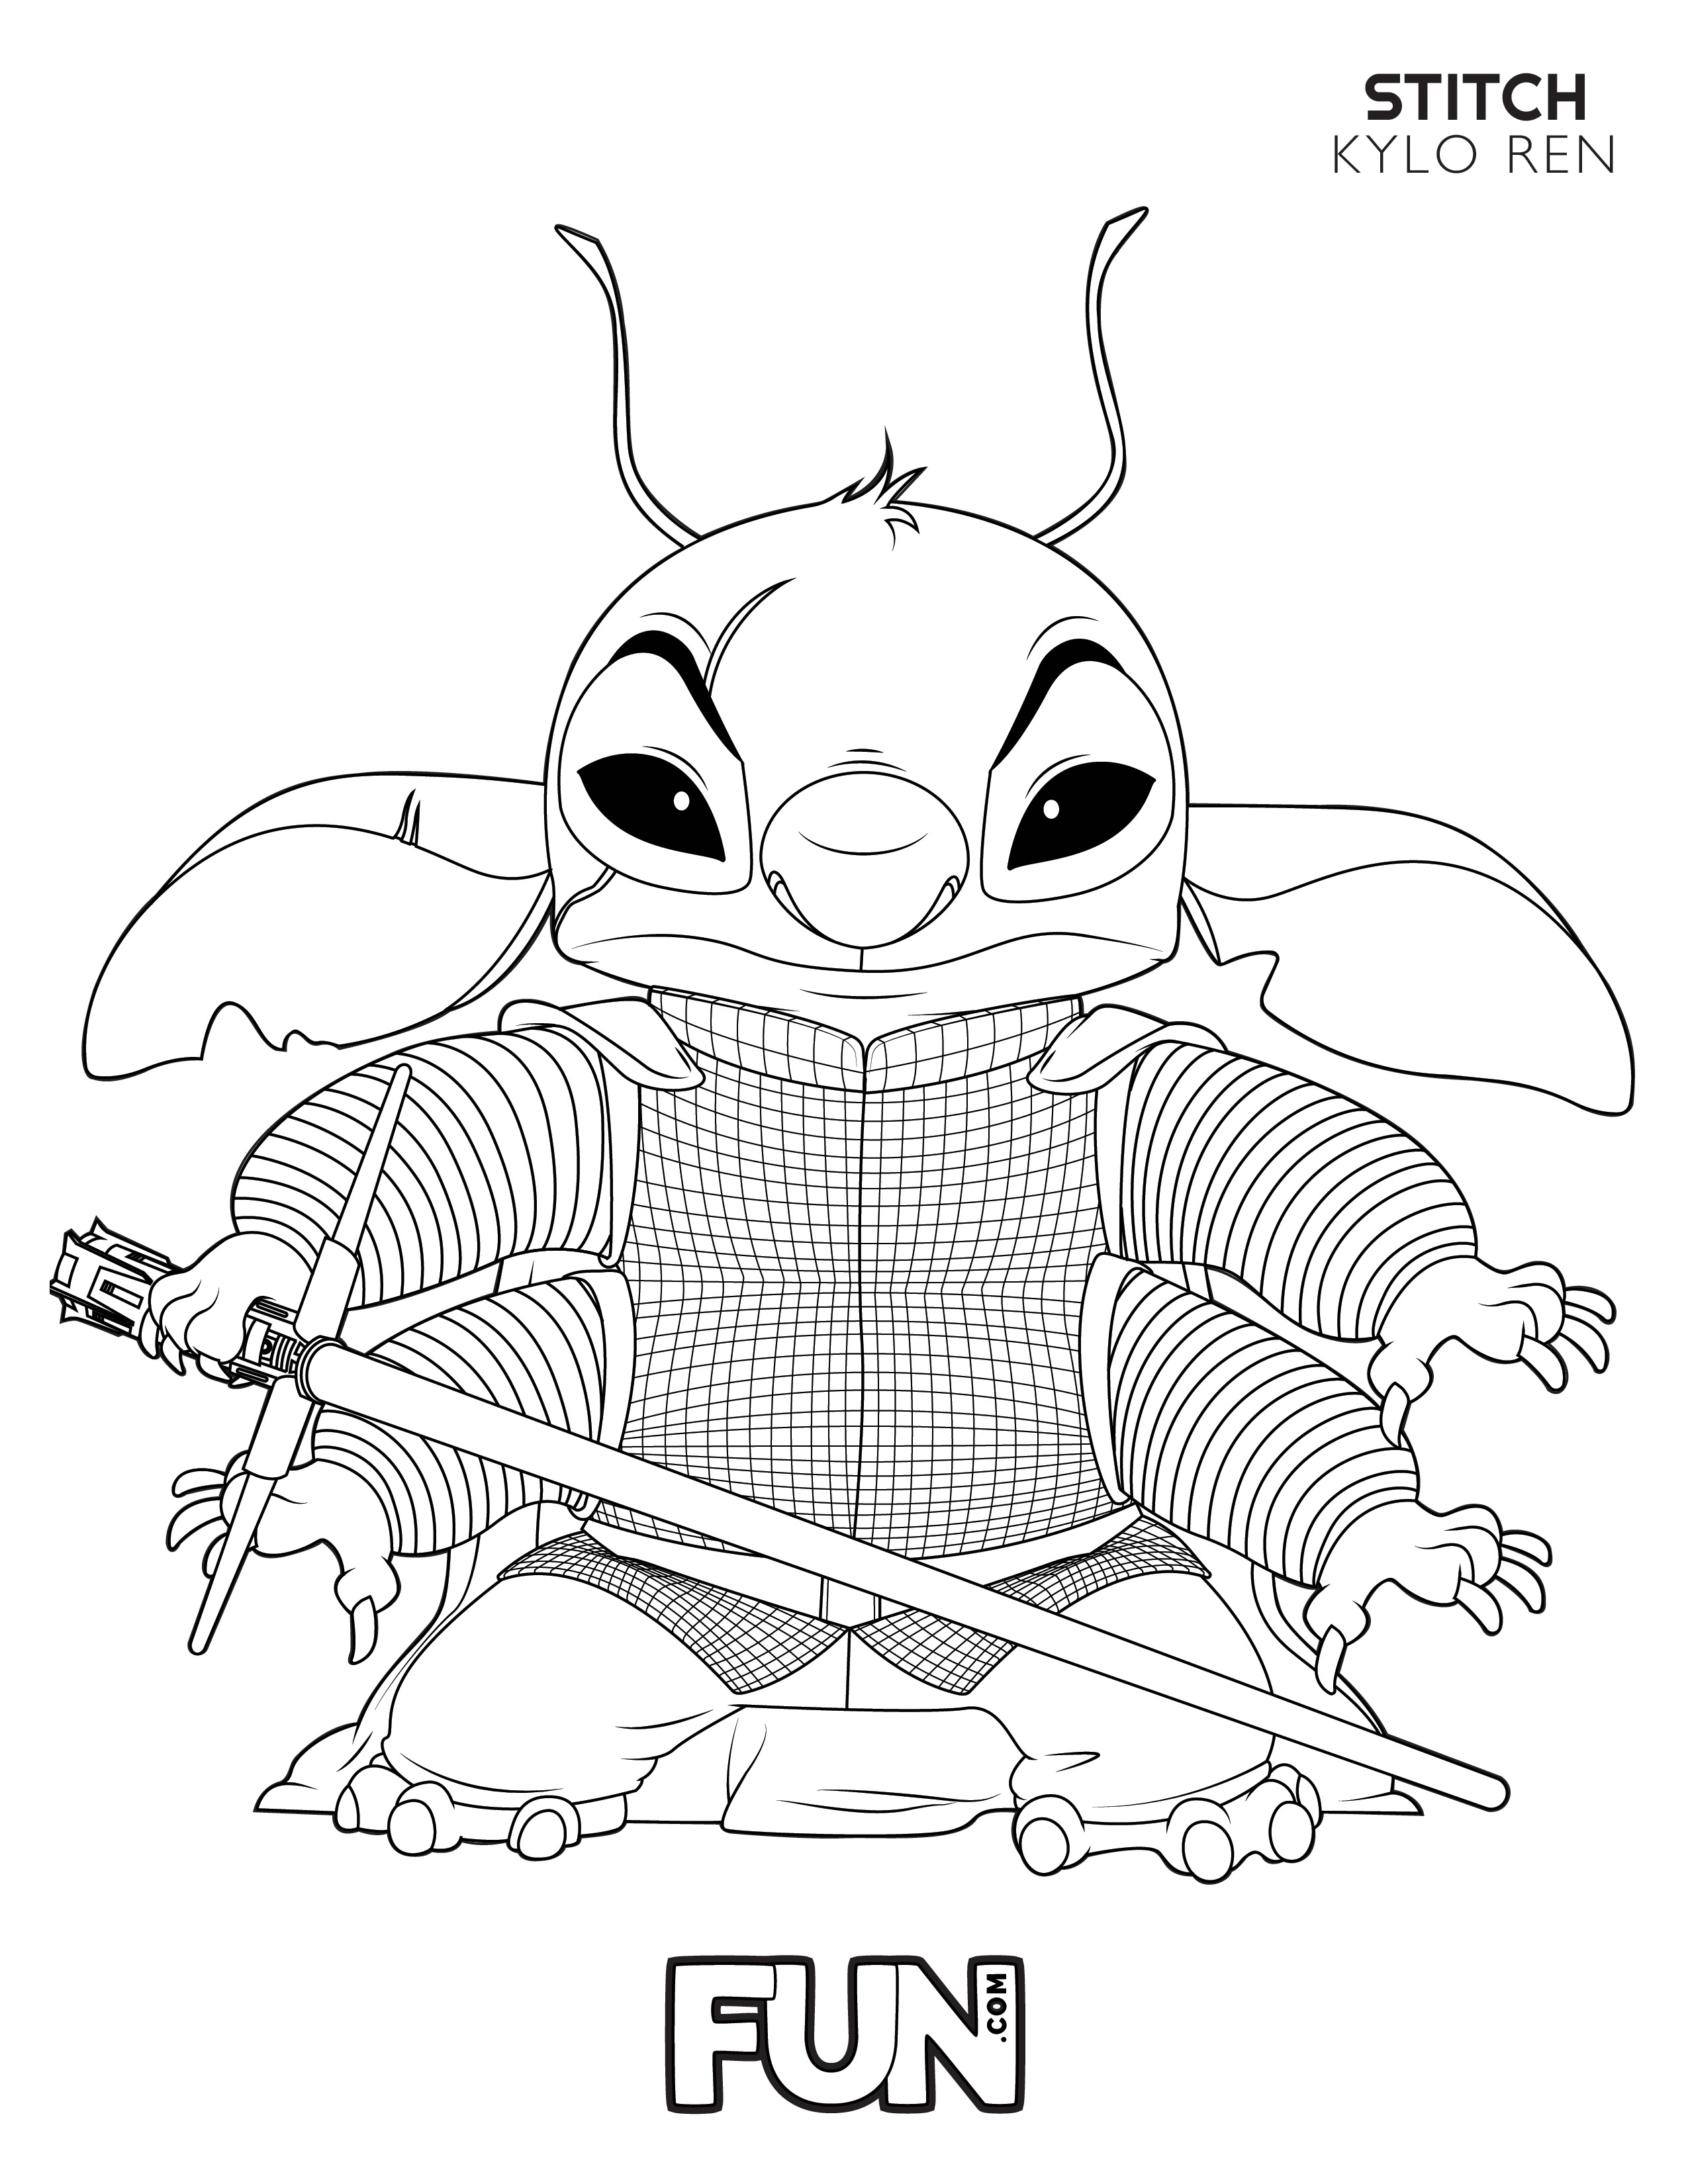 Stitch Kylo Ren Coloring Page